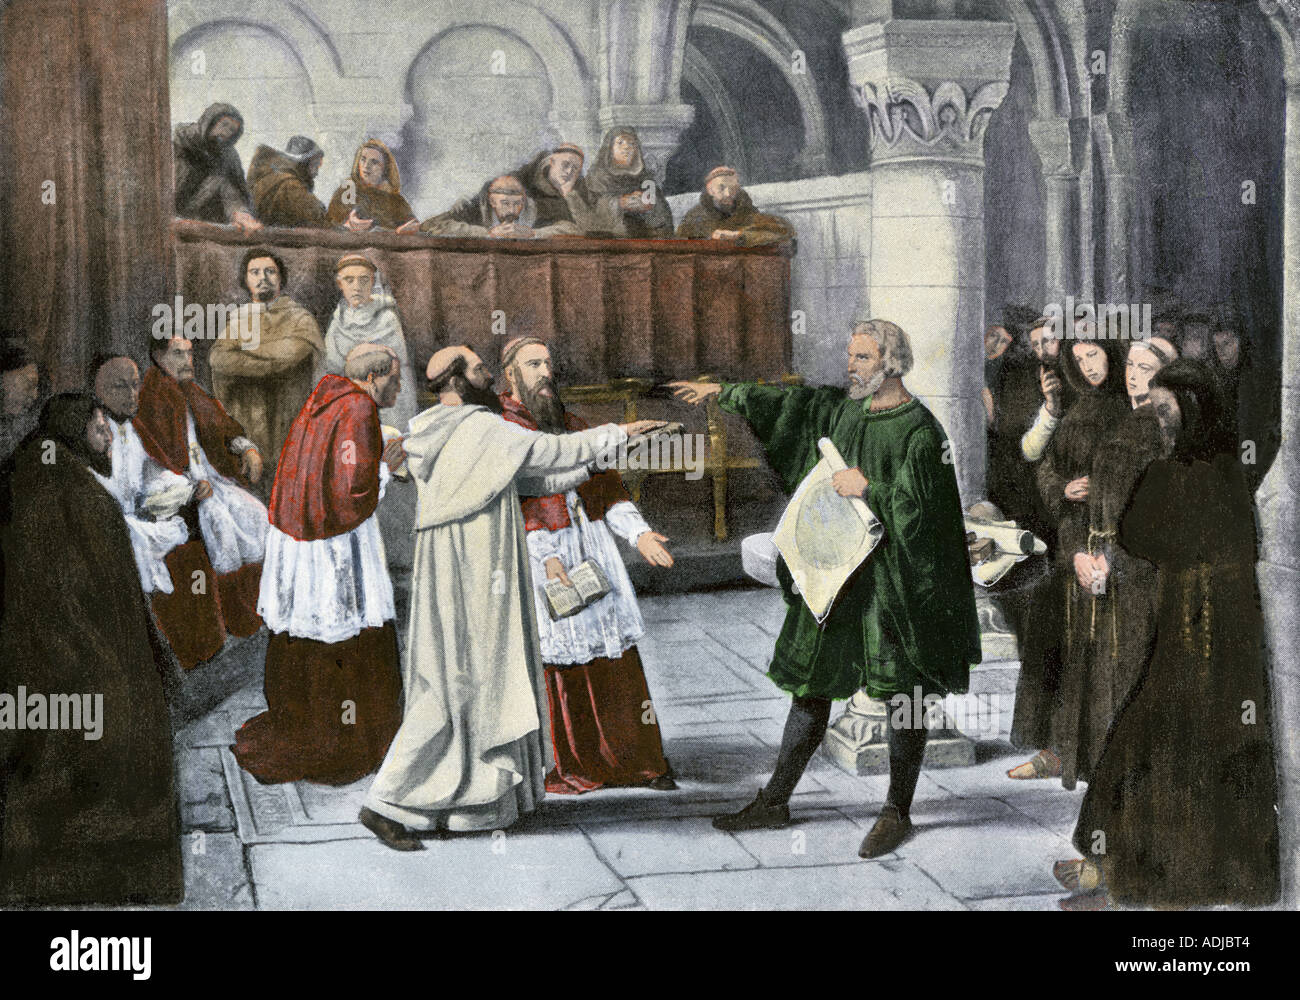 Galileo Galilei defending his astronomical observations before the Inquisition 1633. Hand-colored halftone of an illustration Stock Photo